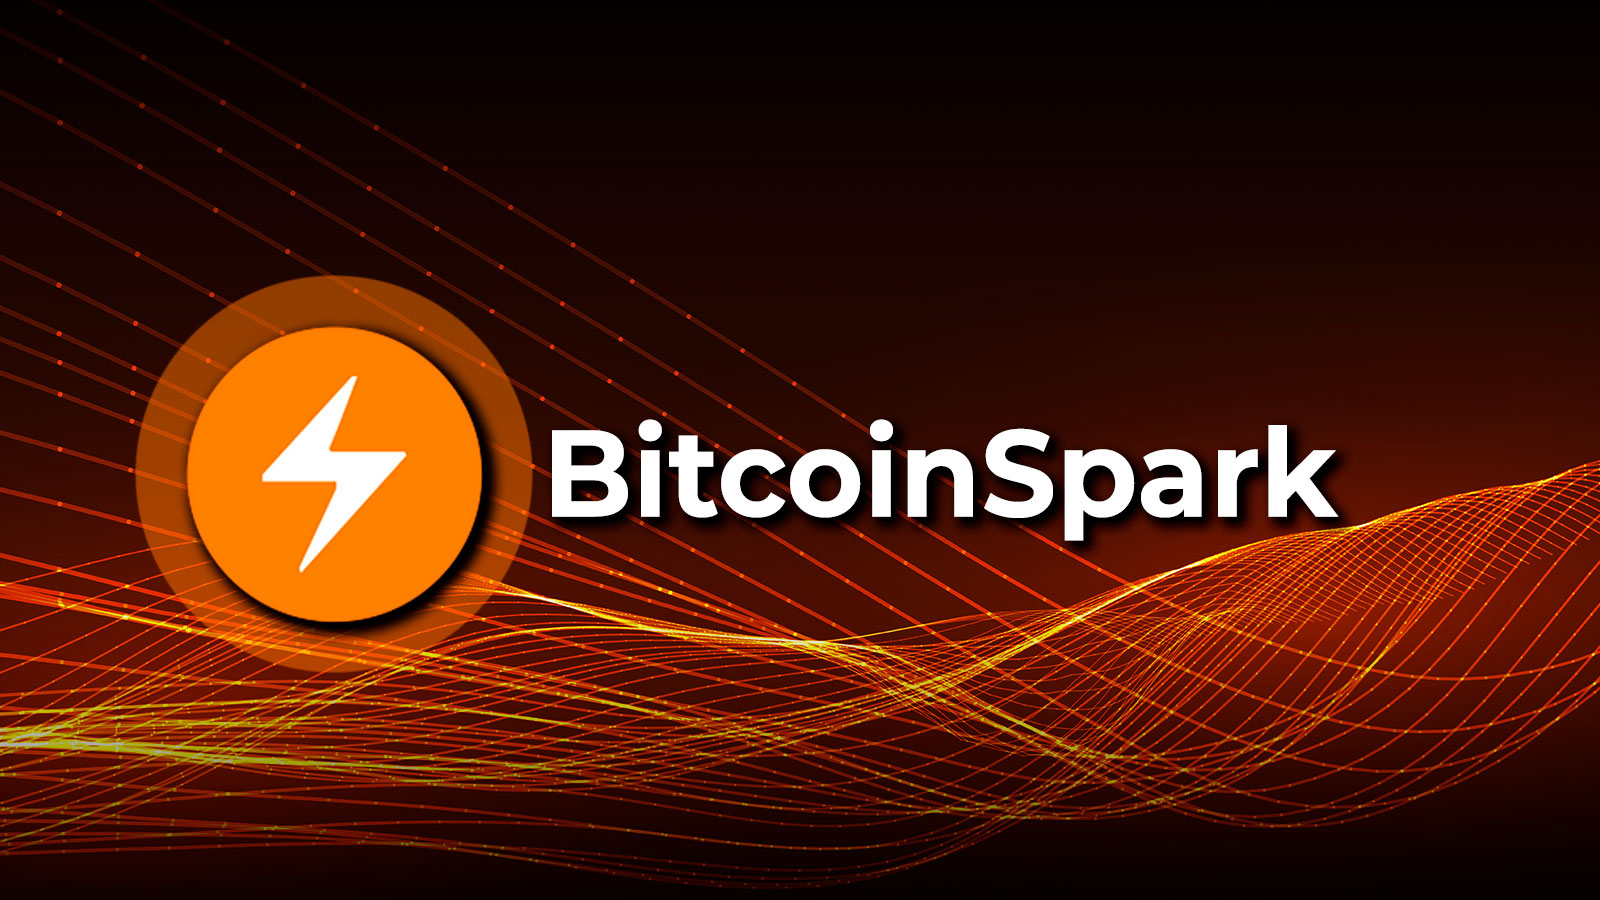 Bitcoin's And Ethereum's Weakness Fixed With Bitcoin Spark's Impressive Whale Resistance Technology